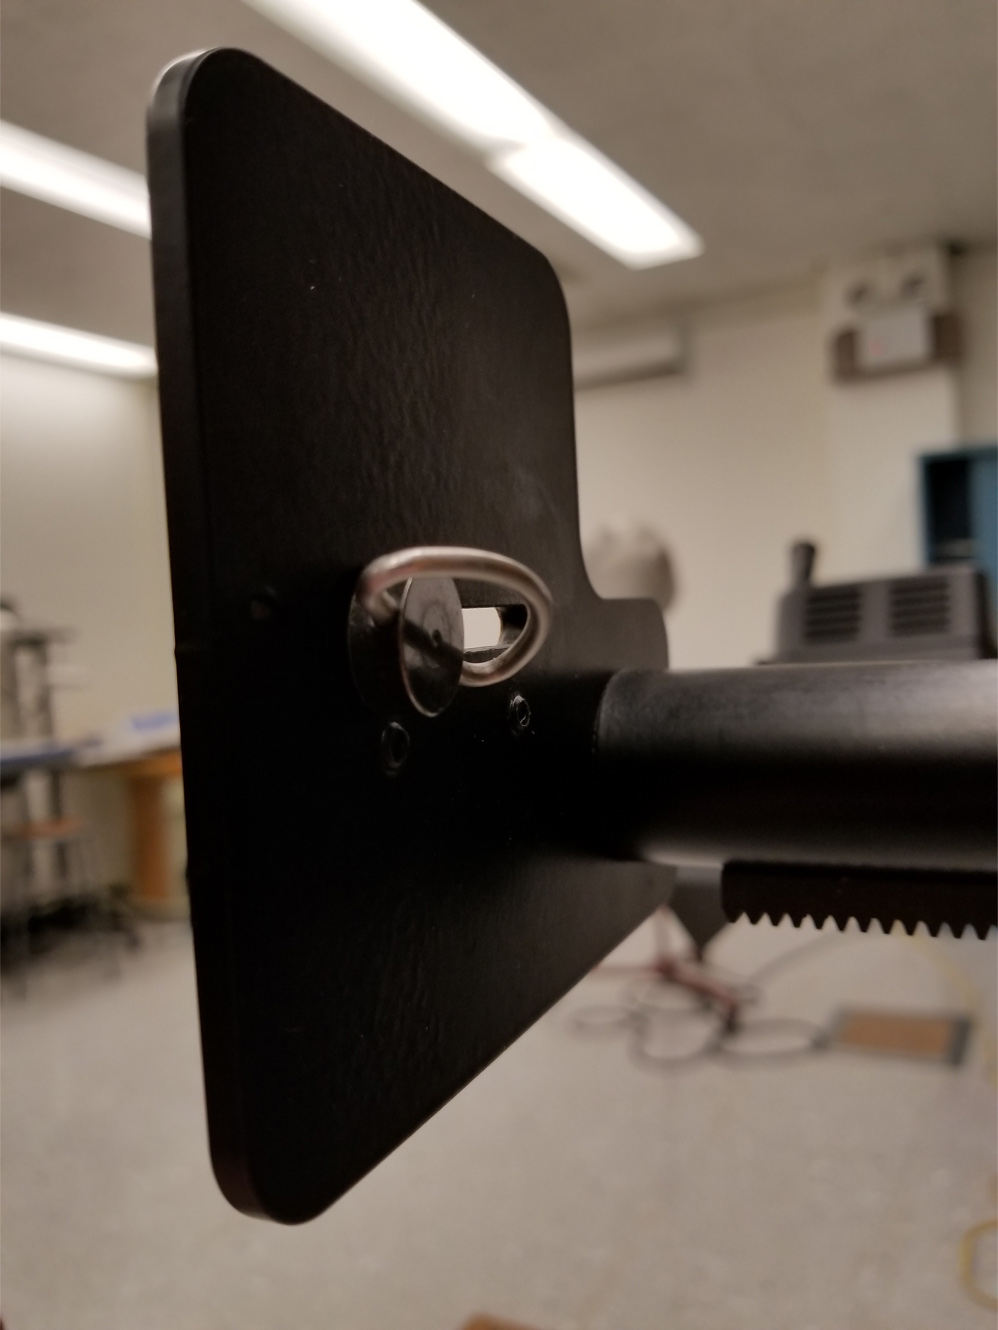 Image of the back of the Copy Stand where the screw for the camera mount is located